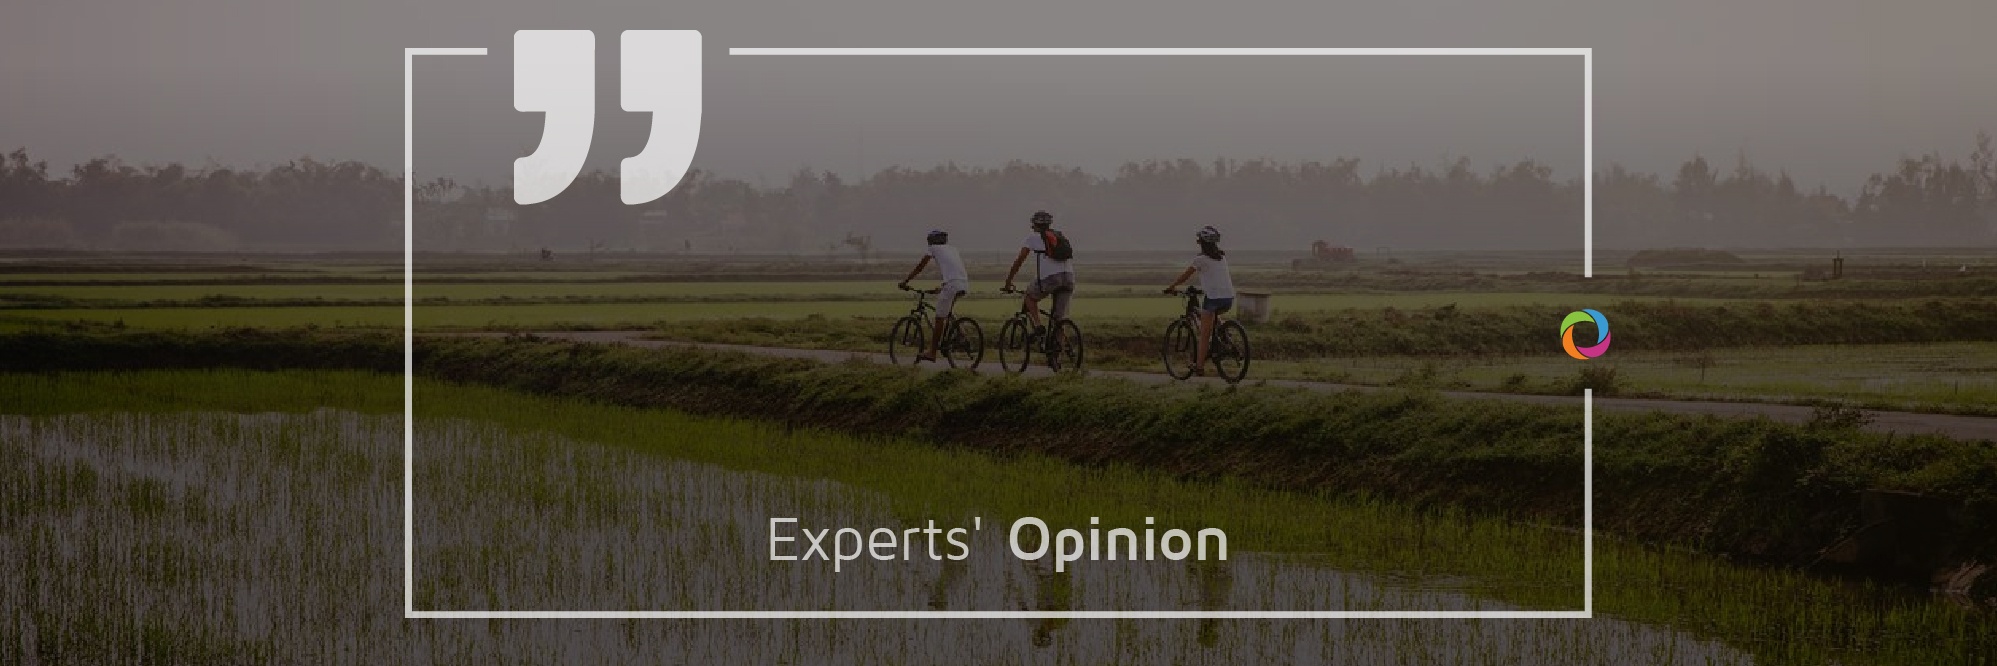 Experts’ Opinions| The impact of agricultural land on poverty and inequality in Rural Vietnam 